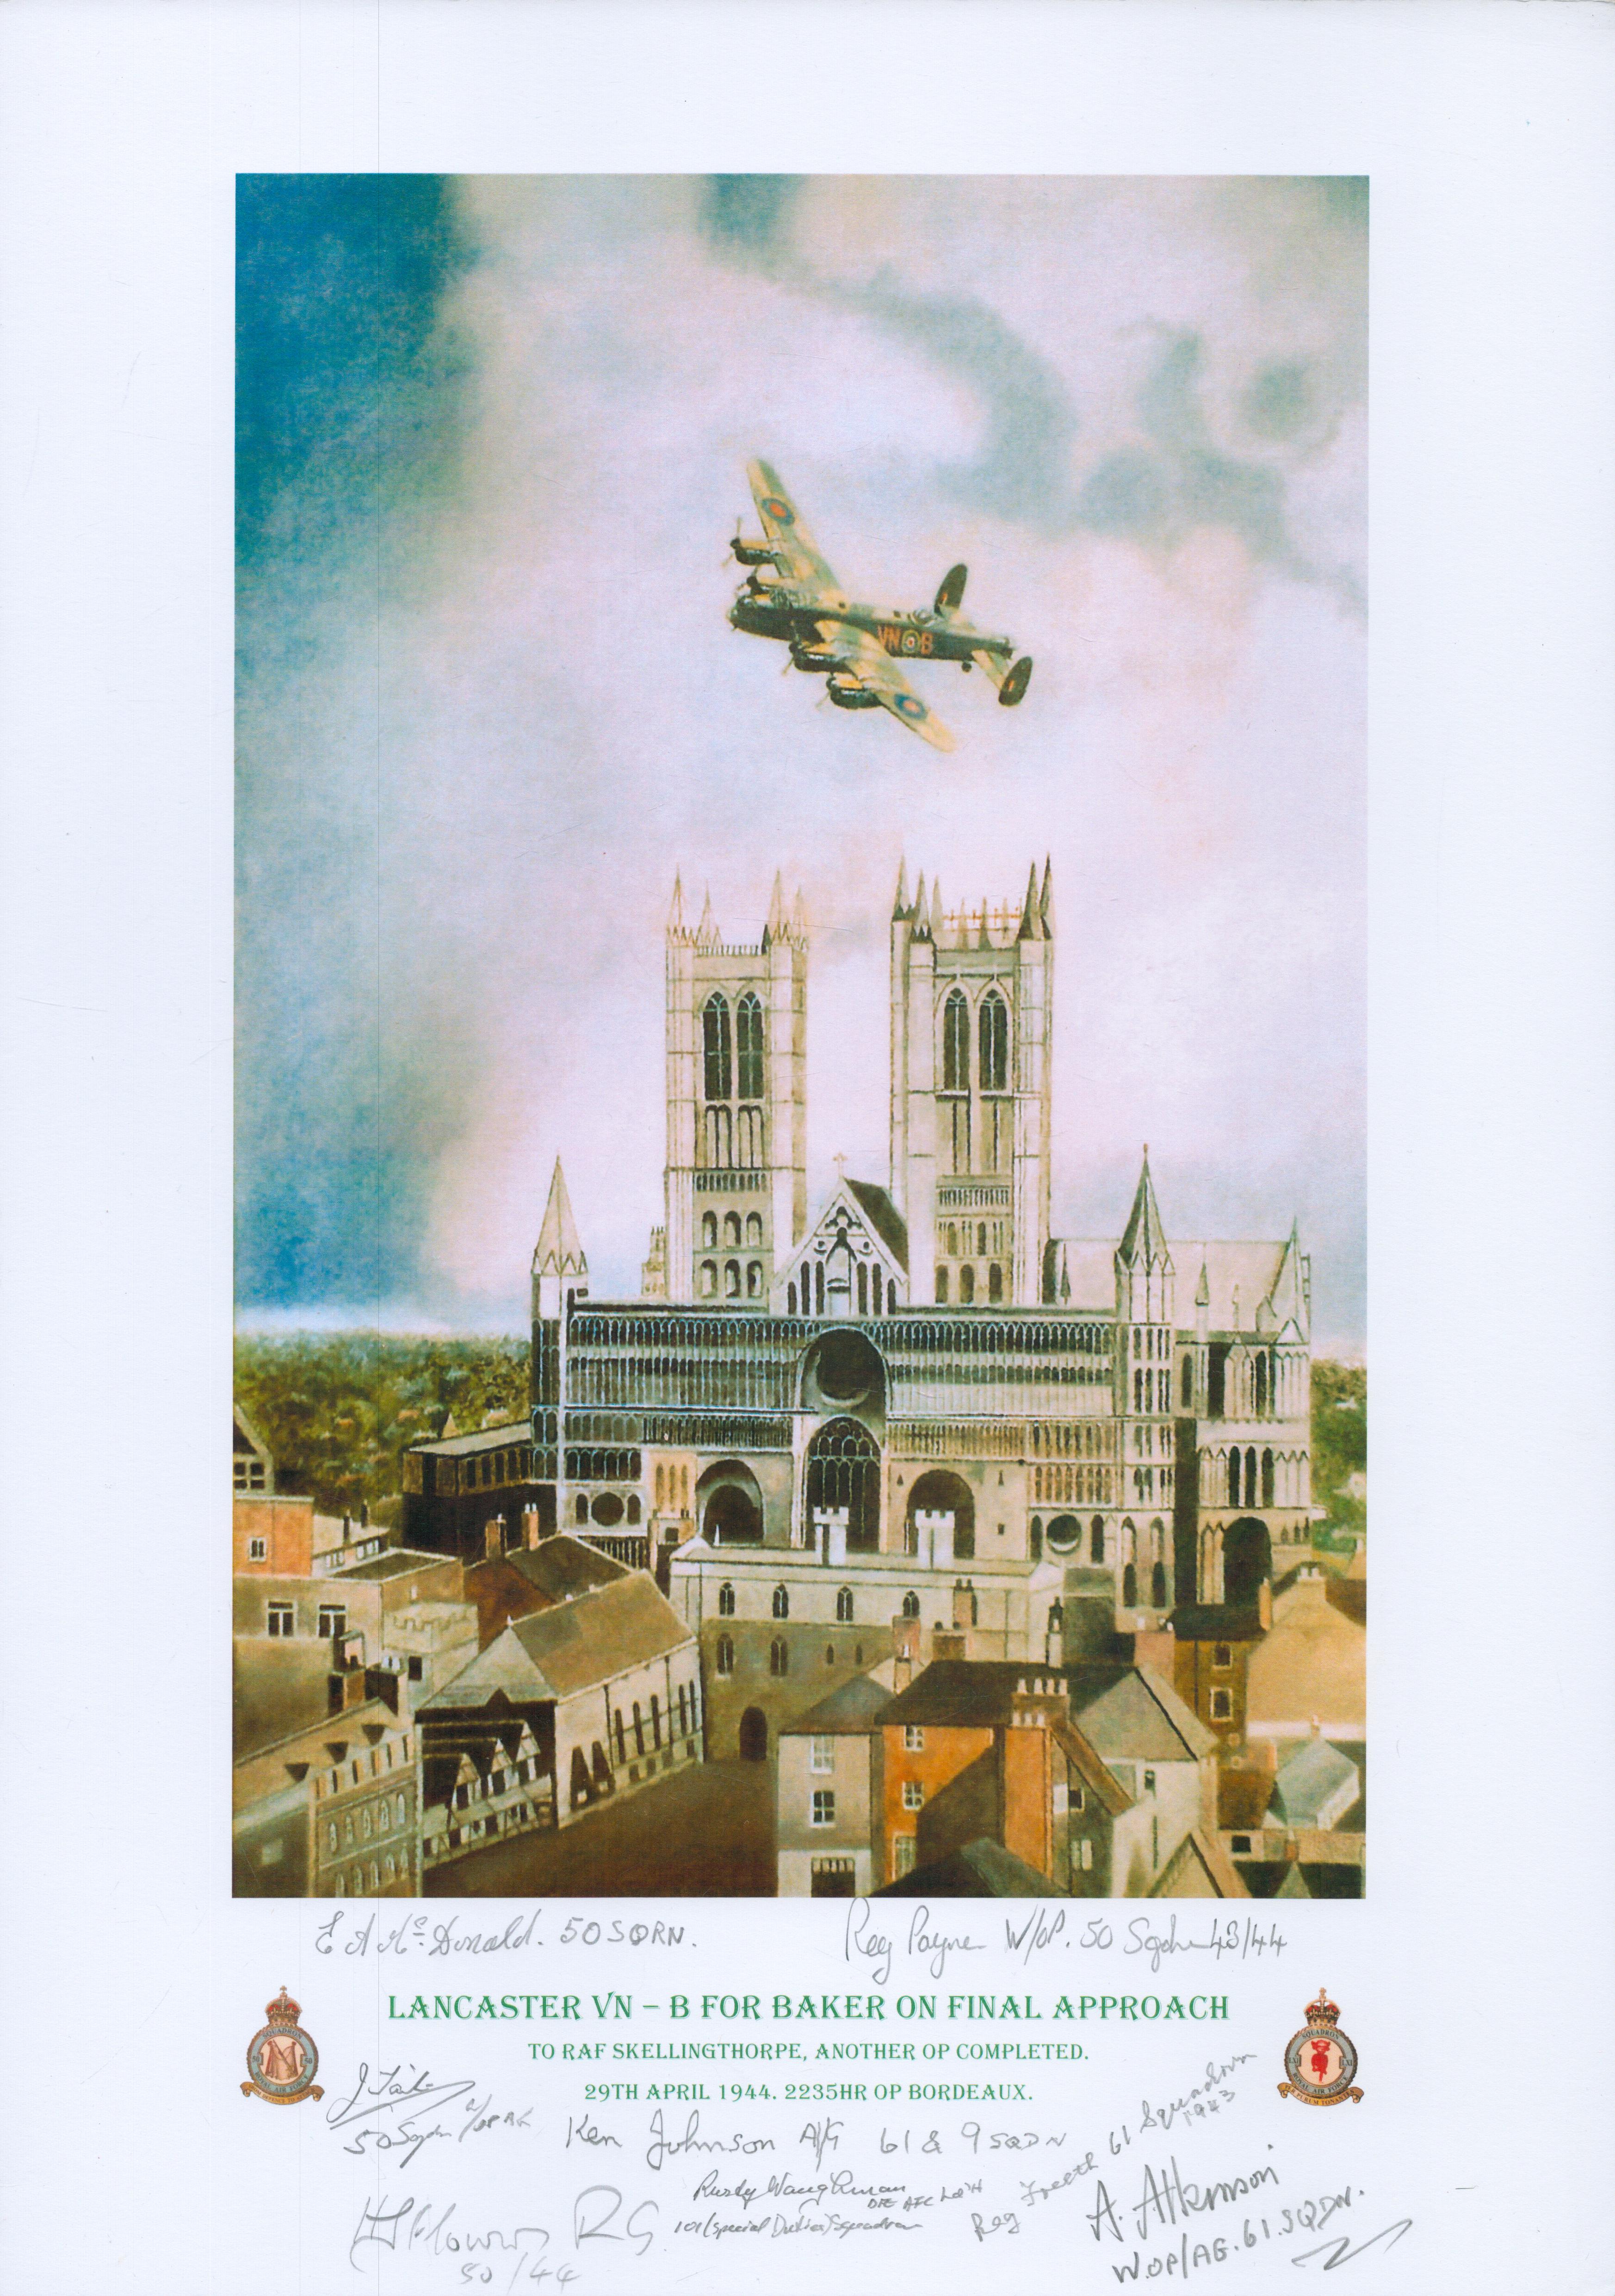 Lancaster VN - B for Baker on final approach print by Reg Payne. Signed by 7 including Mcdonald,